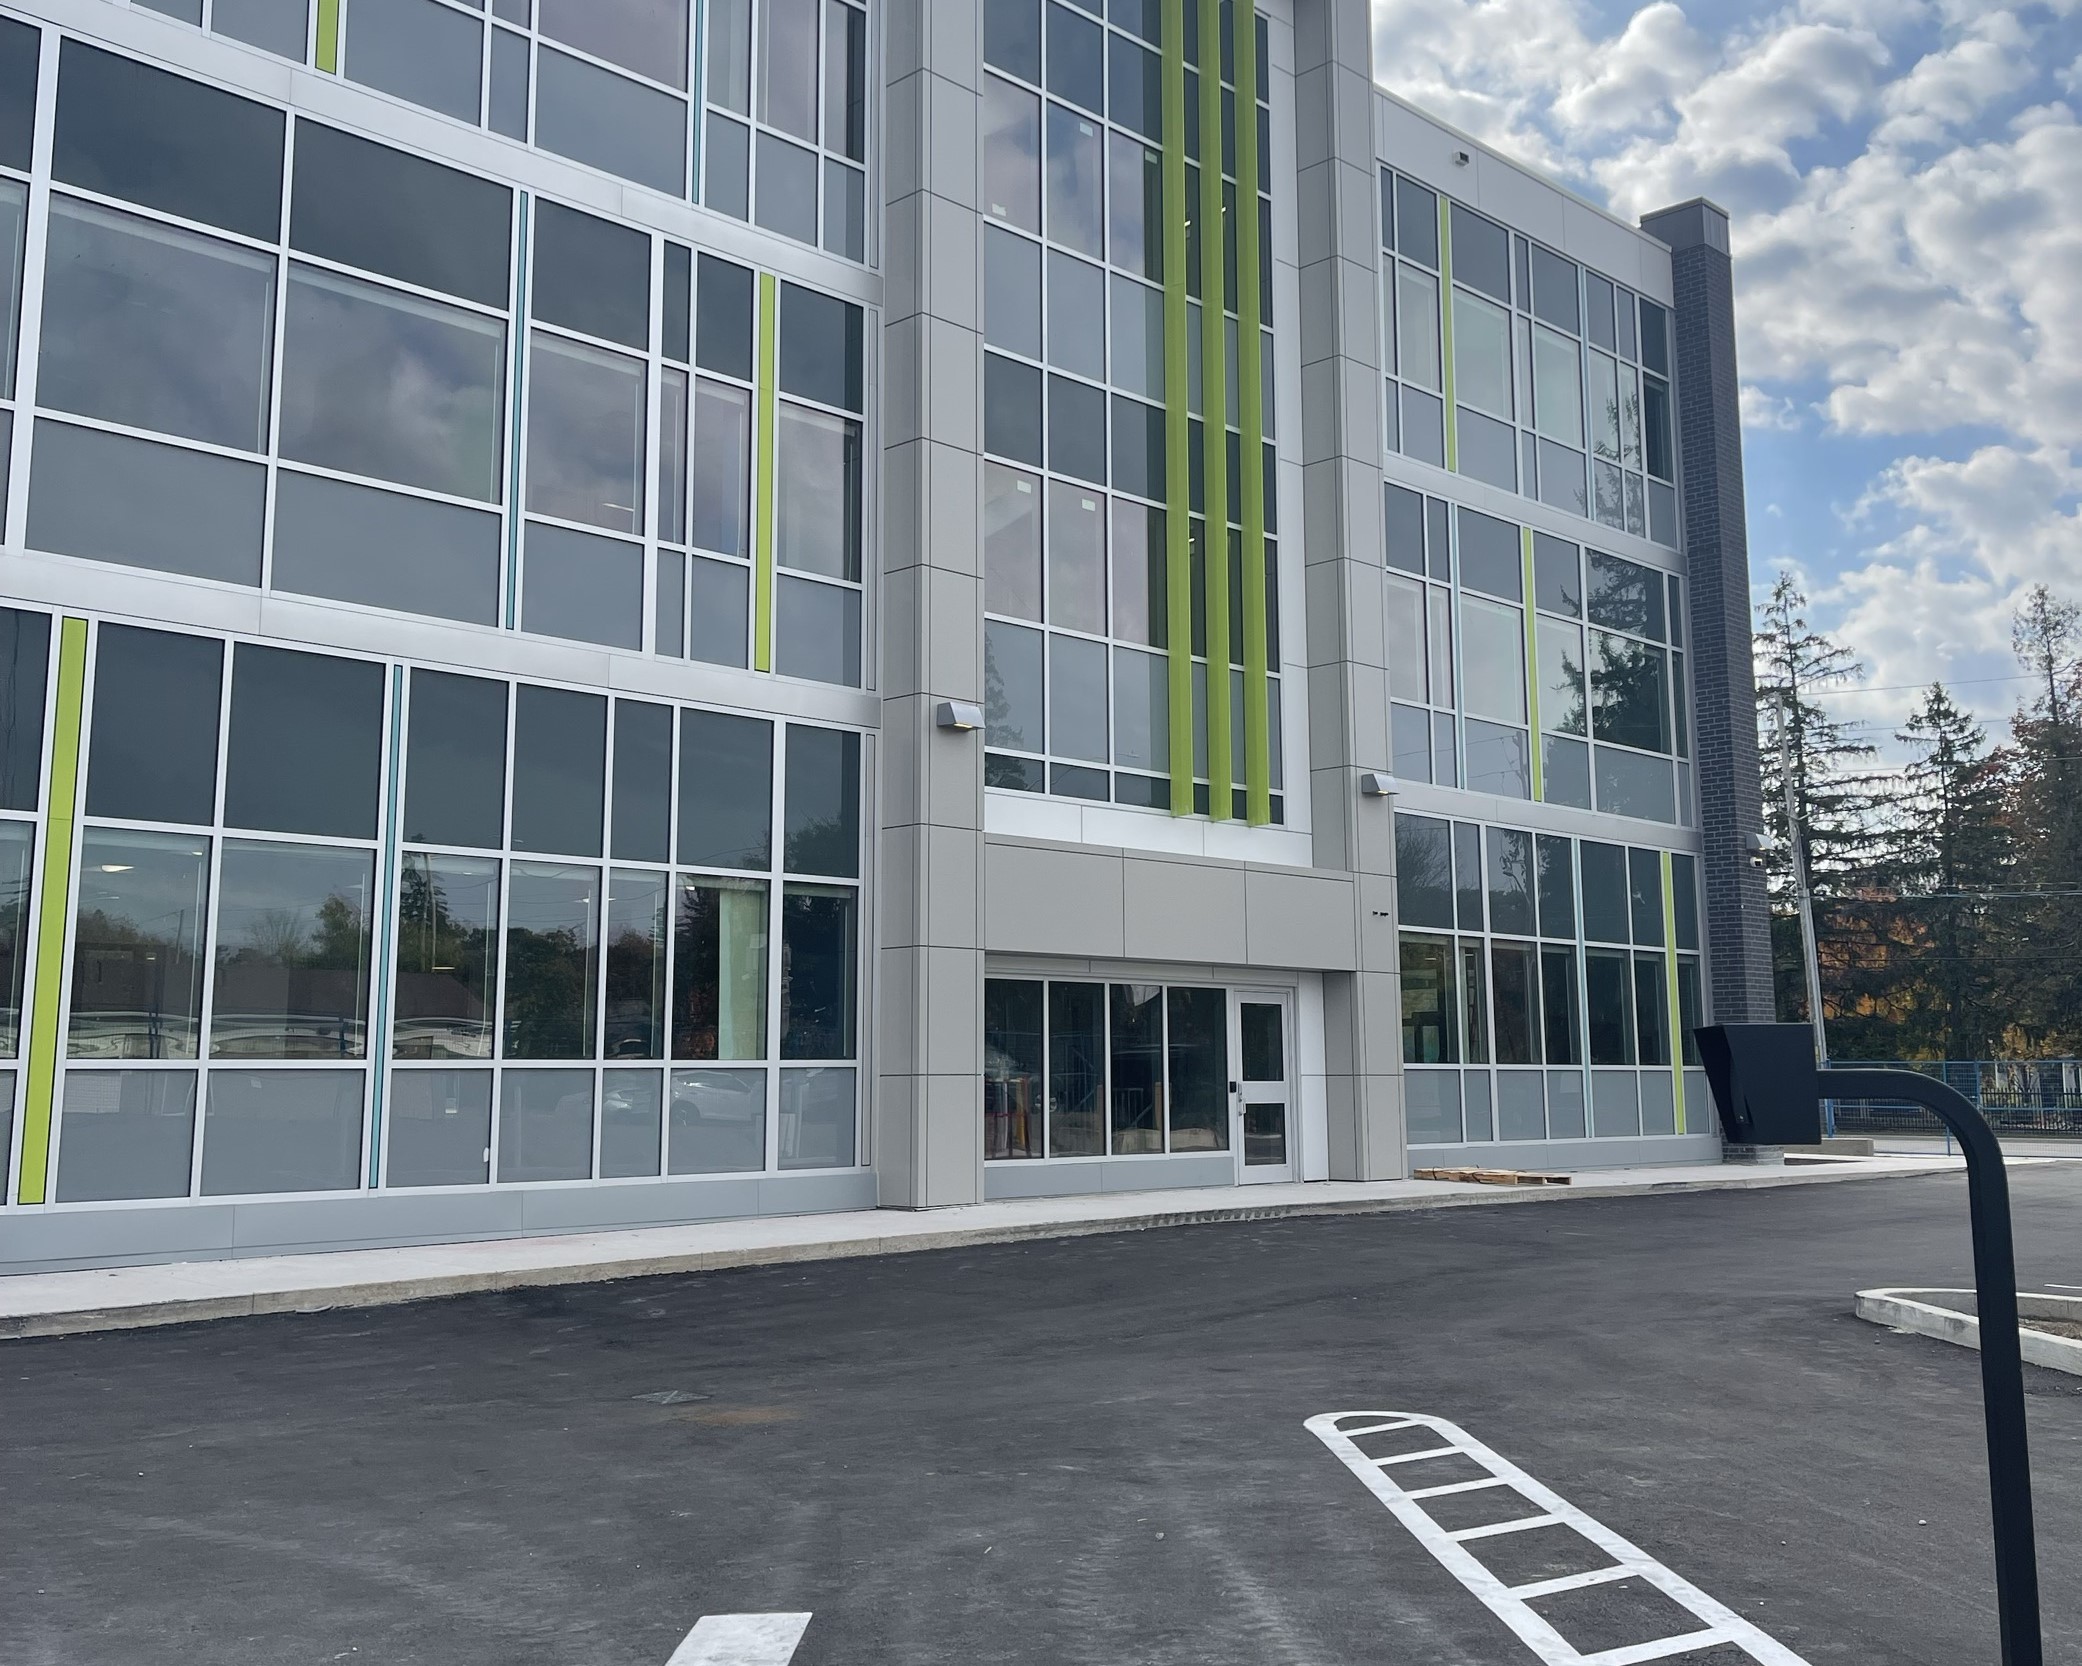 New youth metal health building opens in Guelph